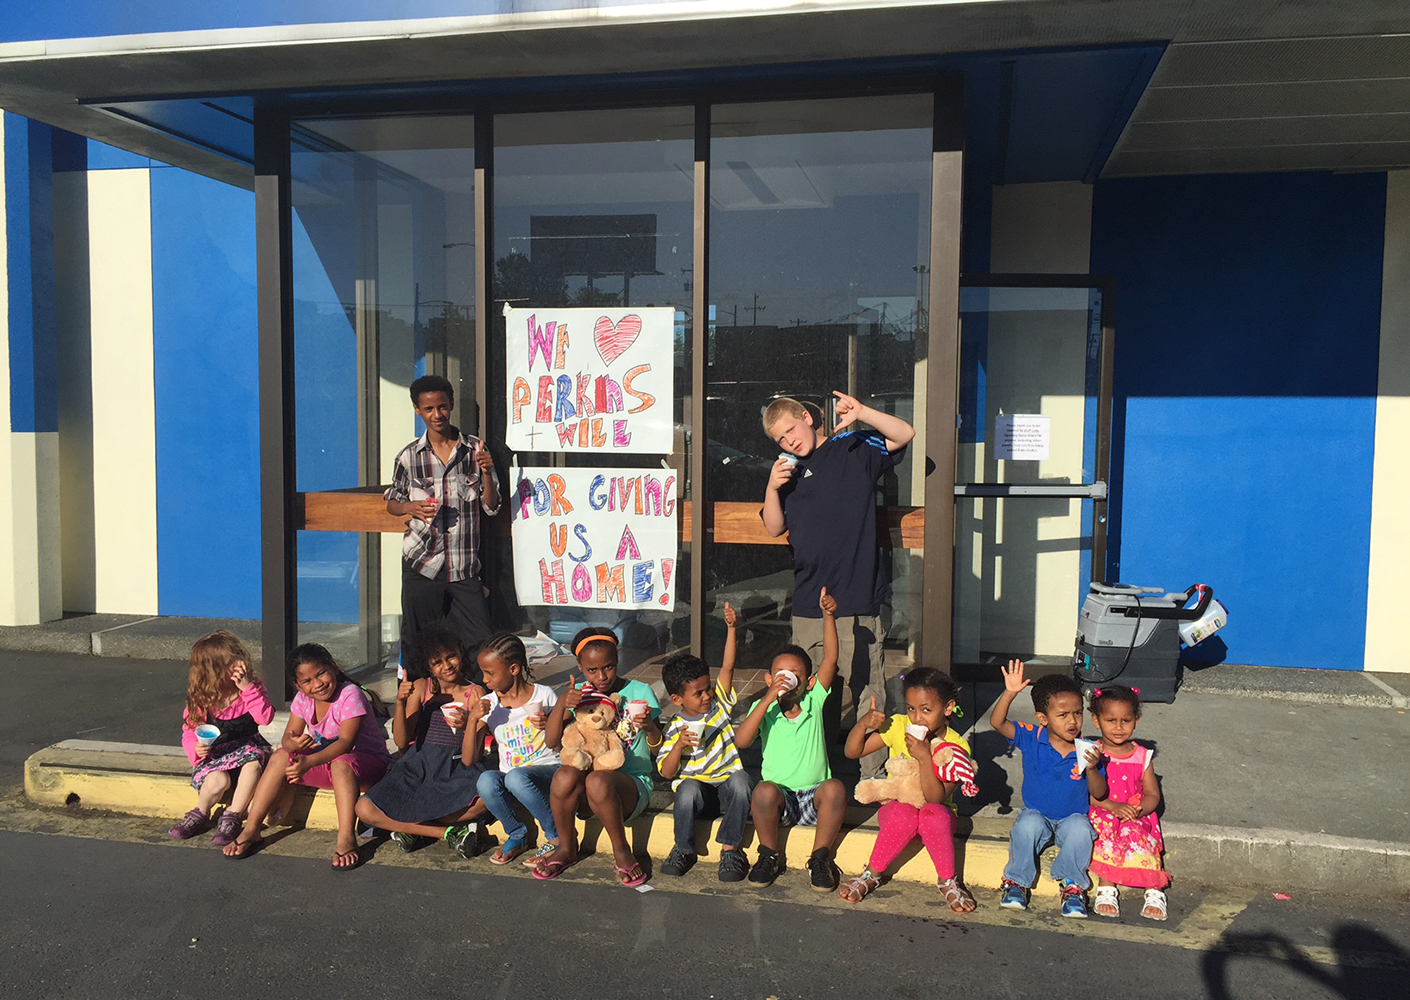 Kids gathered in front of building with hand-made sign that reads we love Perkins+Will